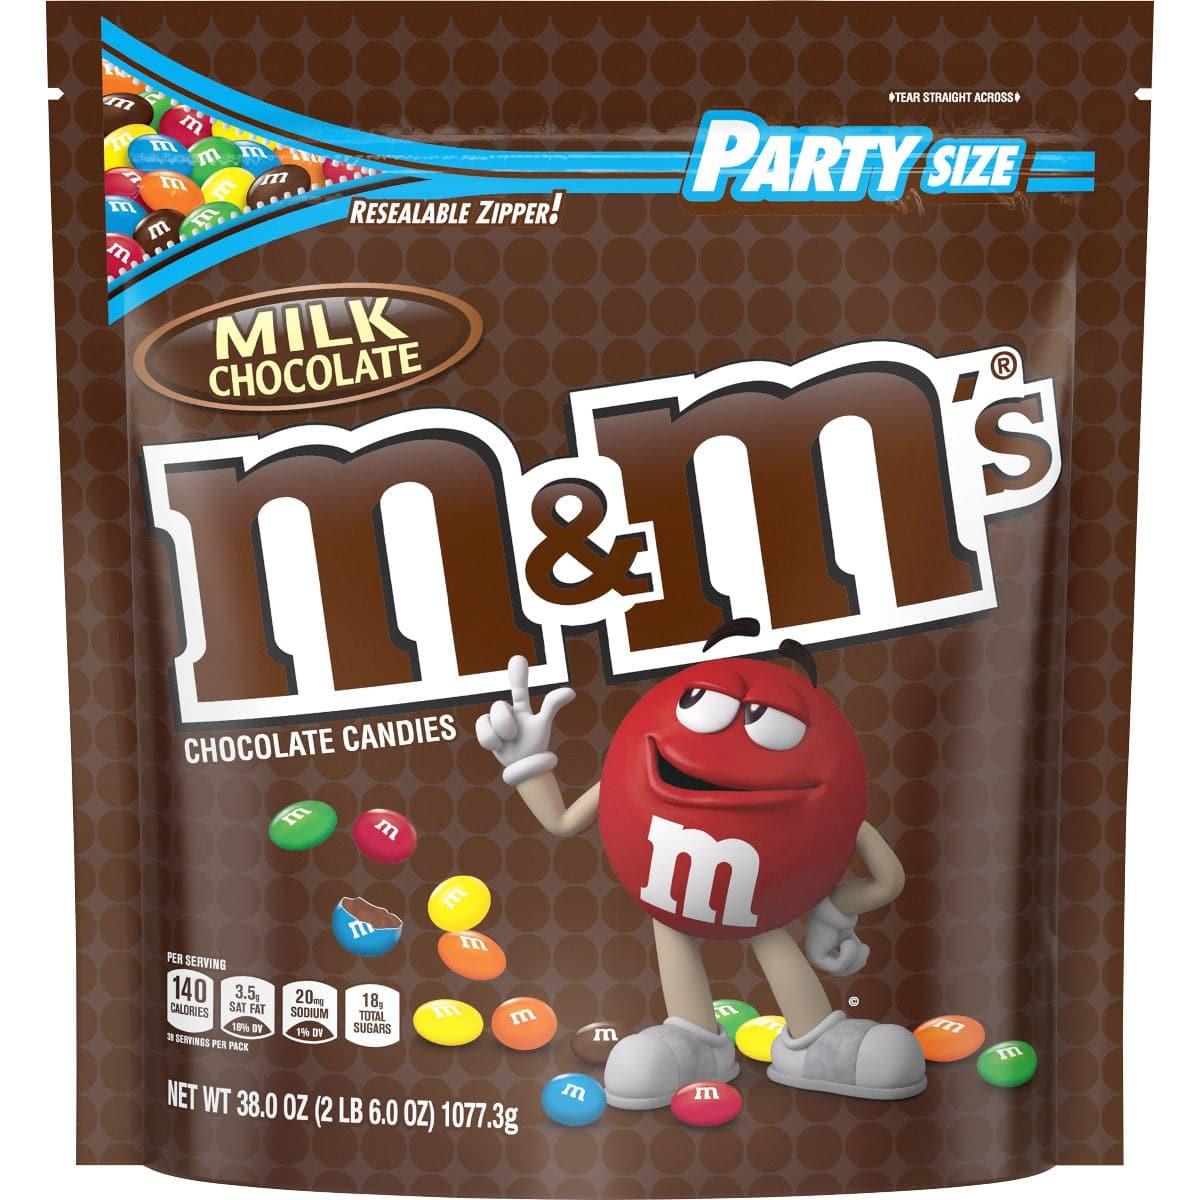 M&M'S Peanut Chocolate Candy, 38-Ounce Party Size Bag, Yellow